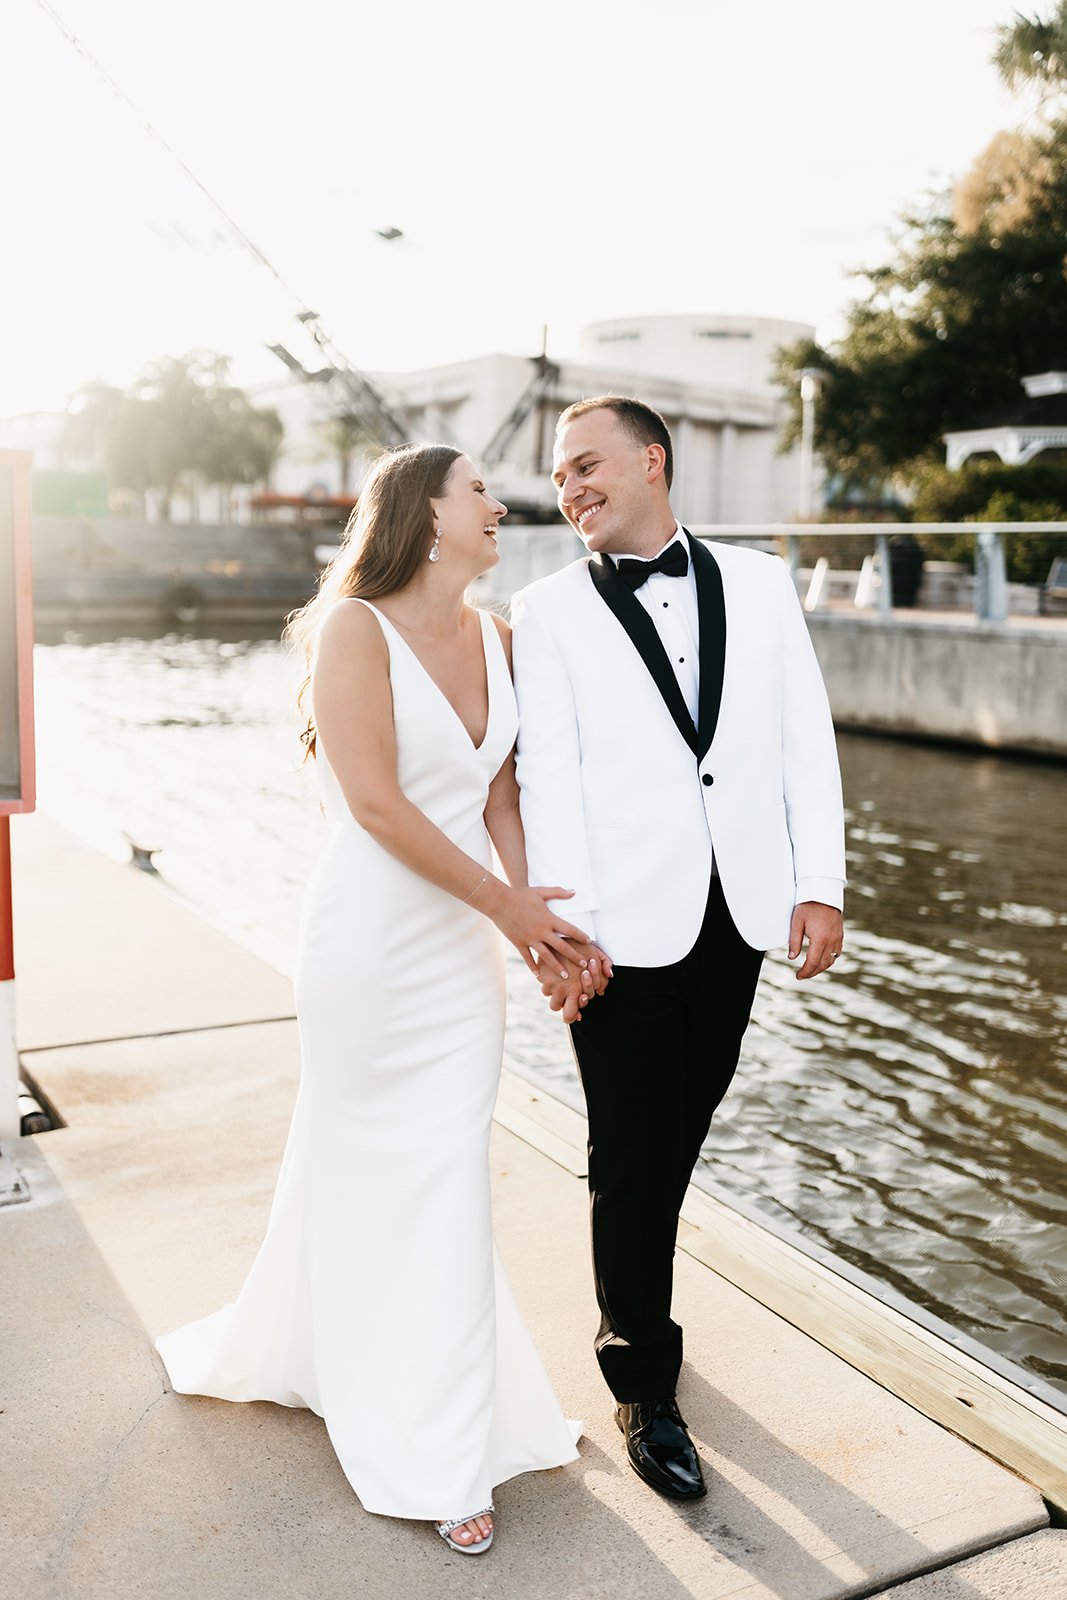 Savannah-bride-casey-in-archie-by-made-with-love-a-sleek-modern-slip-dress-purchased-from-savannah-bridal-shop-ivory-and-beau-8.jpg